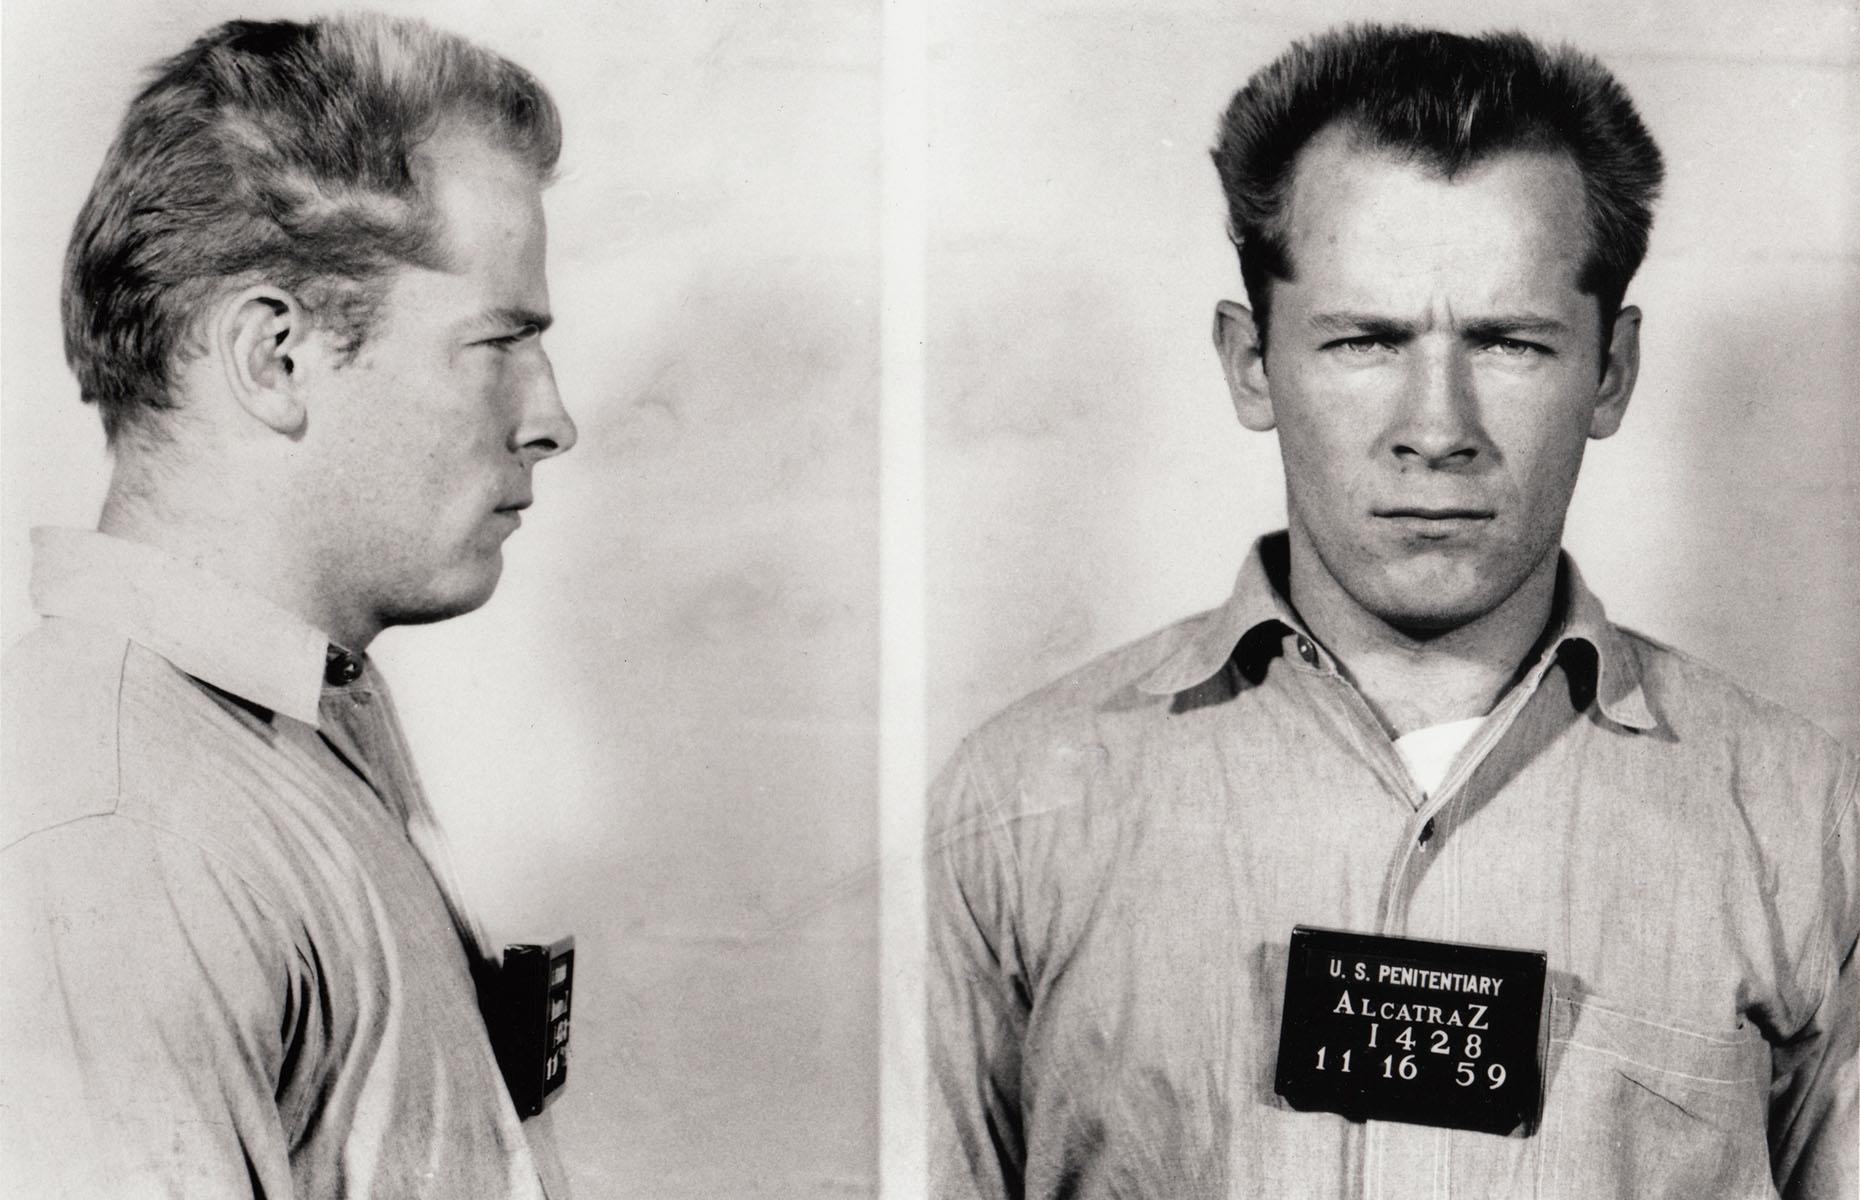 <p>One of the more recent criminals to arrive on Alcatraz's shores, James 'Whitey' Bulger only died in 2018. He was a notorious organized crime boss who led the Boston-area Winter Hill Gang, and had reportedly also been a high-level FBI informant starting in the mid-1970s. He spent a brief period in Alcatraz starting in 1959, but was later out of prison for 46 years. When he was eventually arrested again in 2011, the charges included 19 murders.</p>